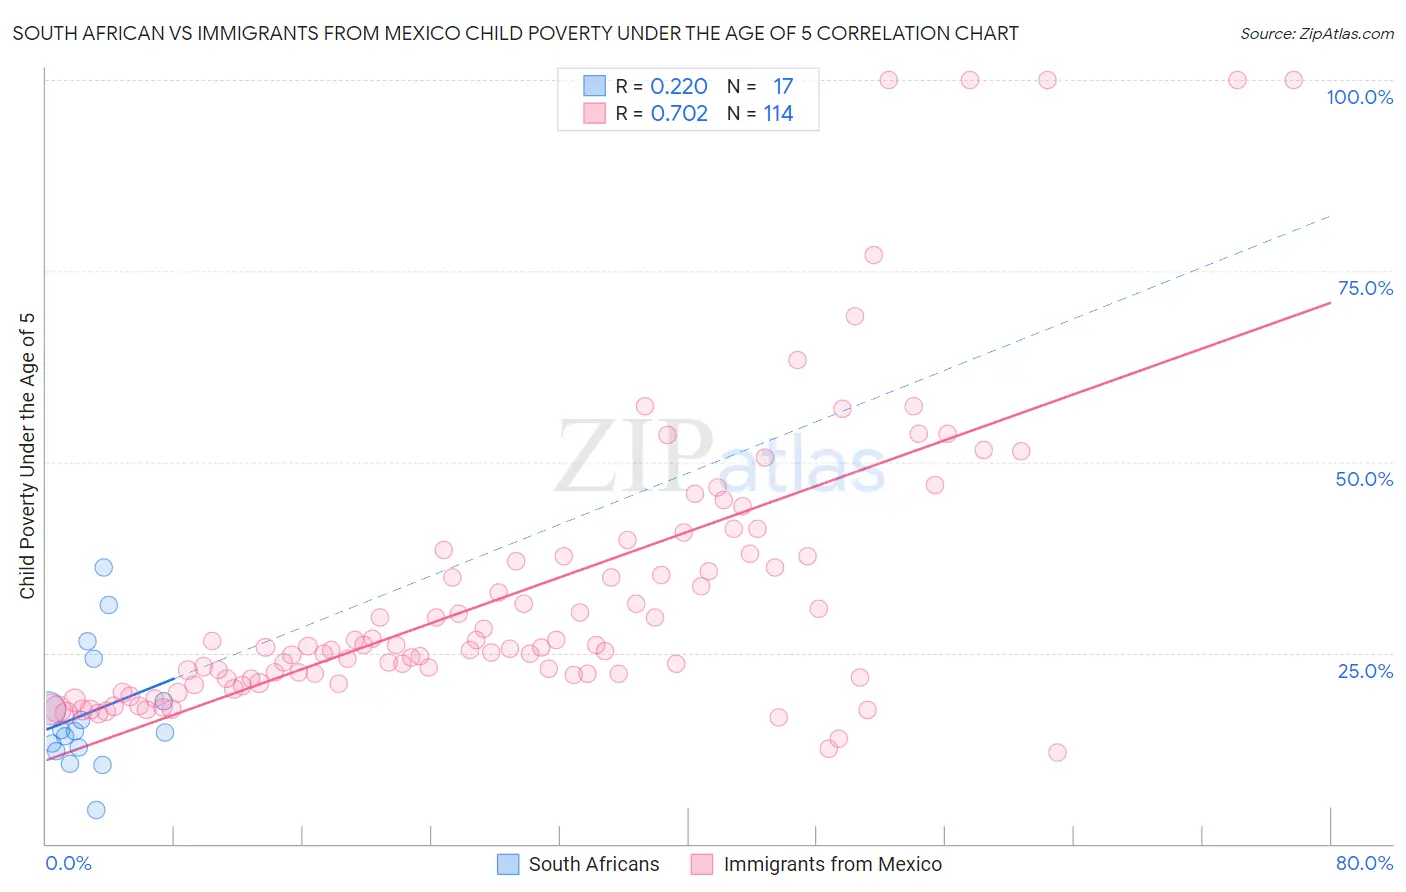 South African vs Immigrants from Mexico Child Poverty Under the Age of 5